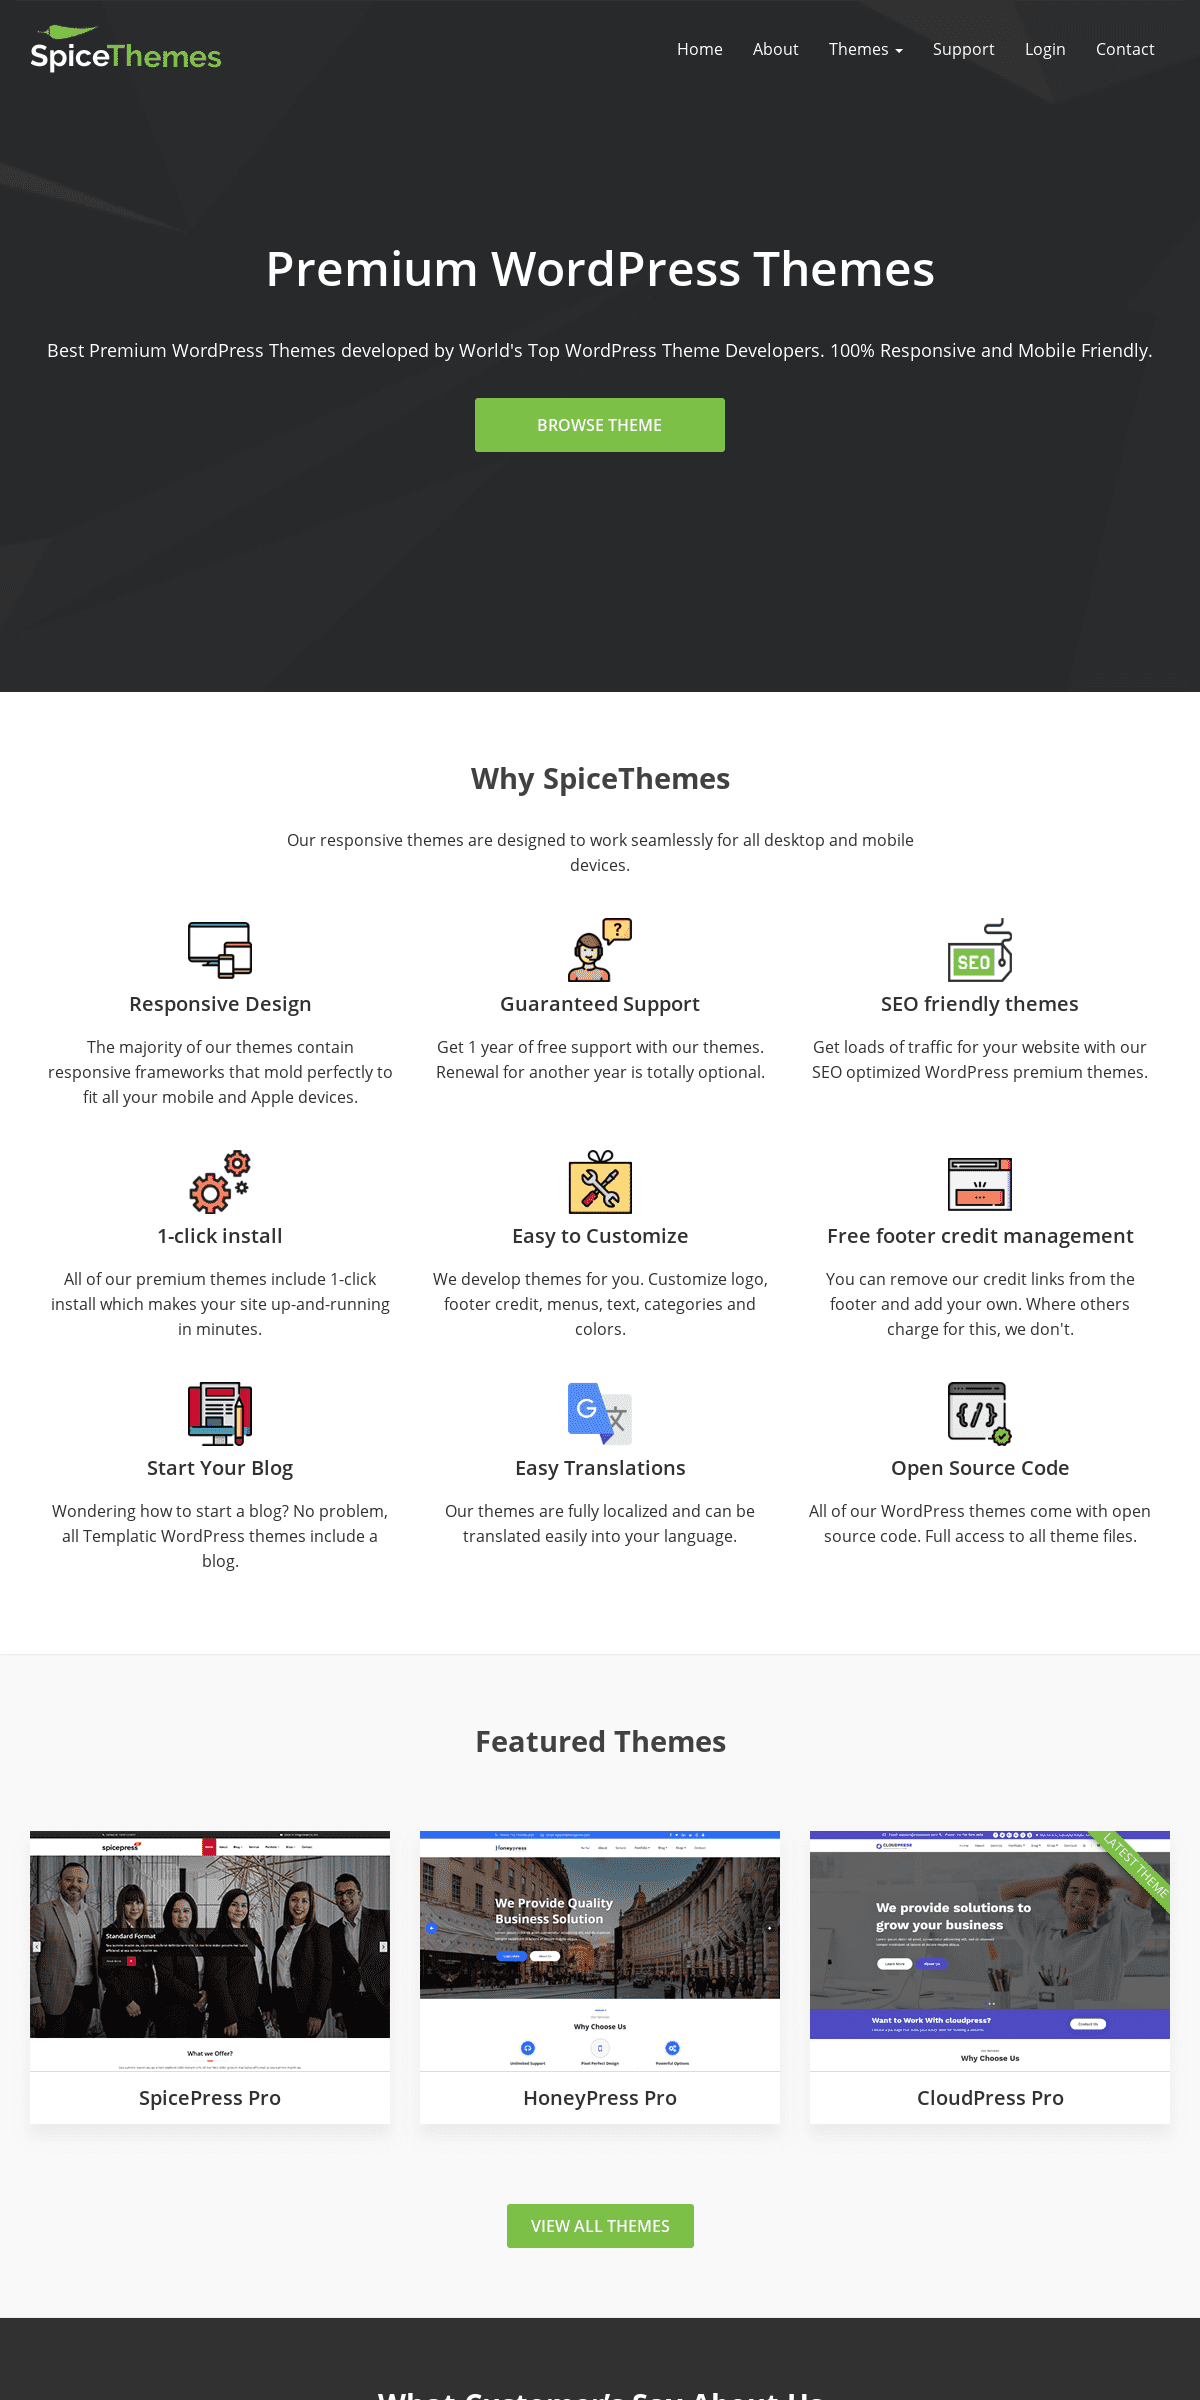 A complete backup of spicethemes.com